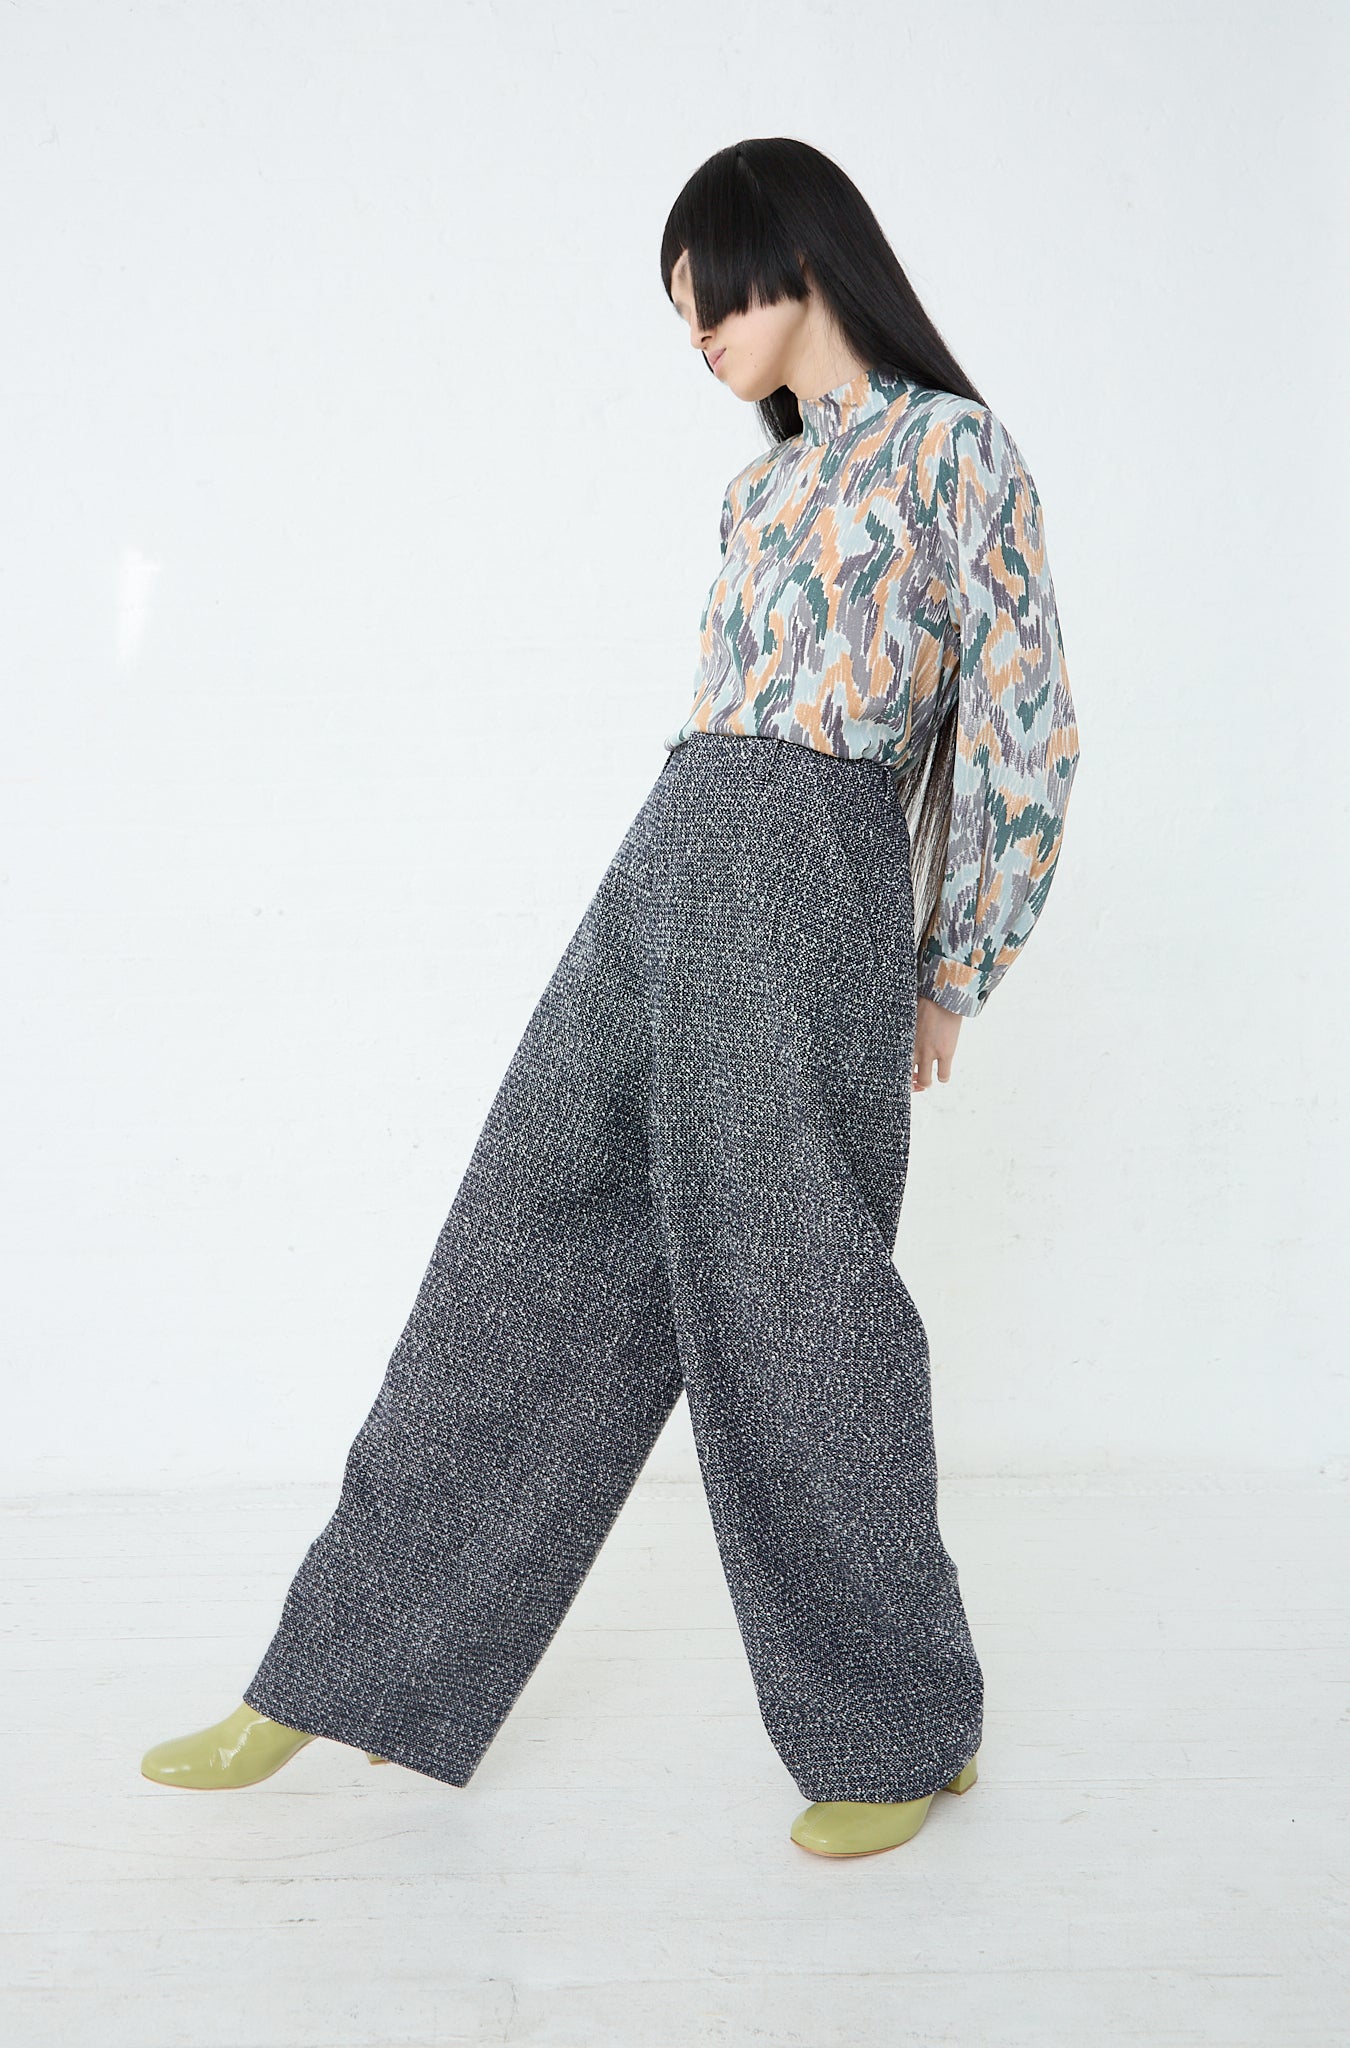 A woman wearing Predawn Trousers in Navy Mix made by Mina Perhonen and a blouse with relaxed fit. Side view and full length.